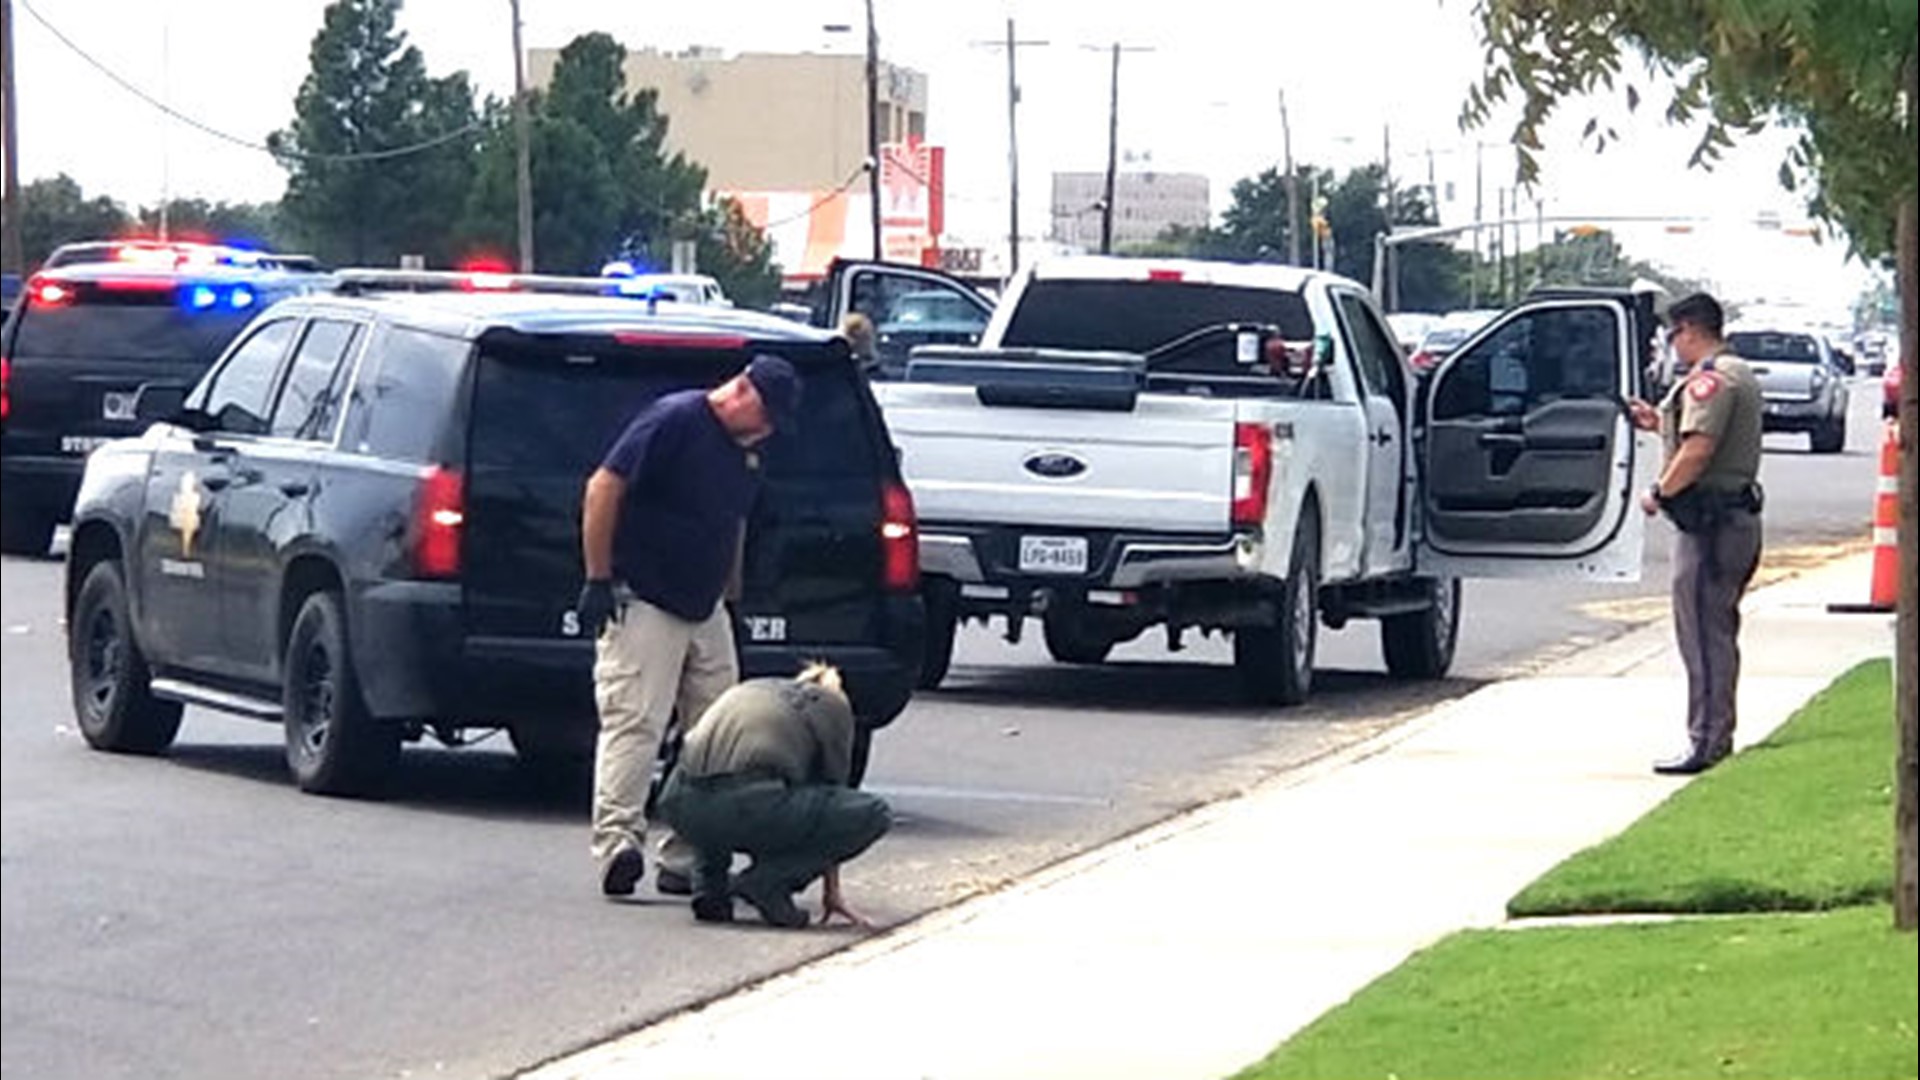 Routine traffic stop leads to mass shooting in Midland-Odessa. Reporter Maria Aguilera is live in Midland with the coverage.